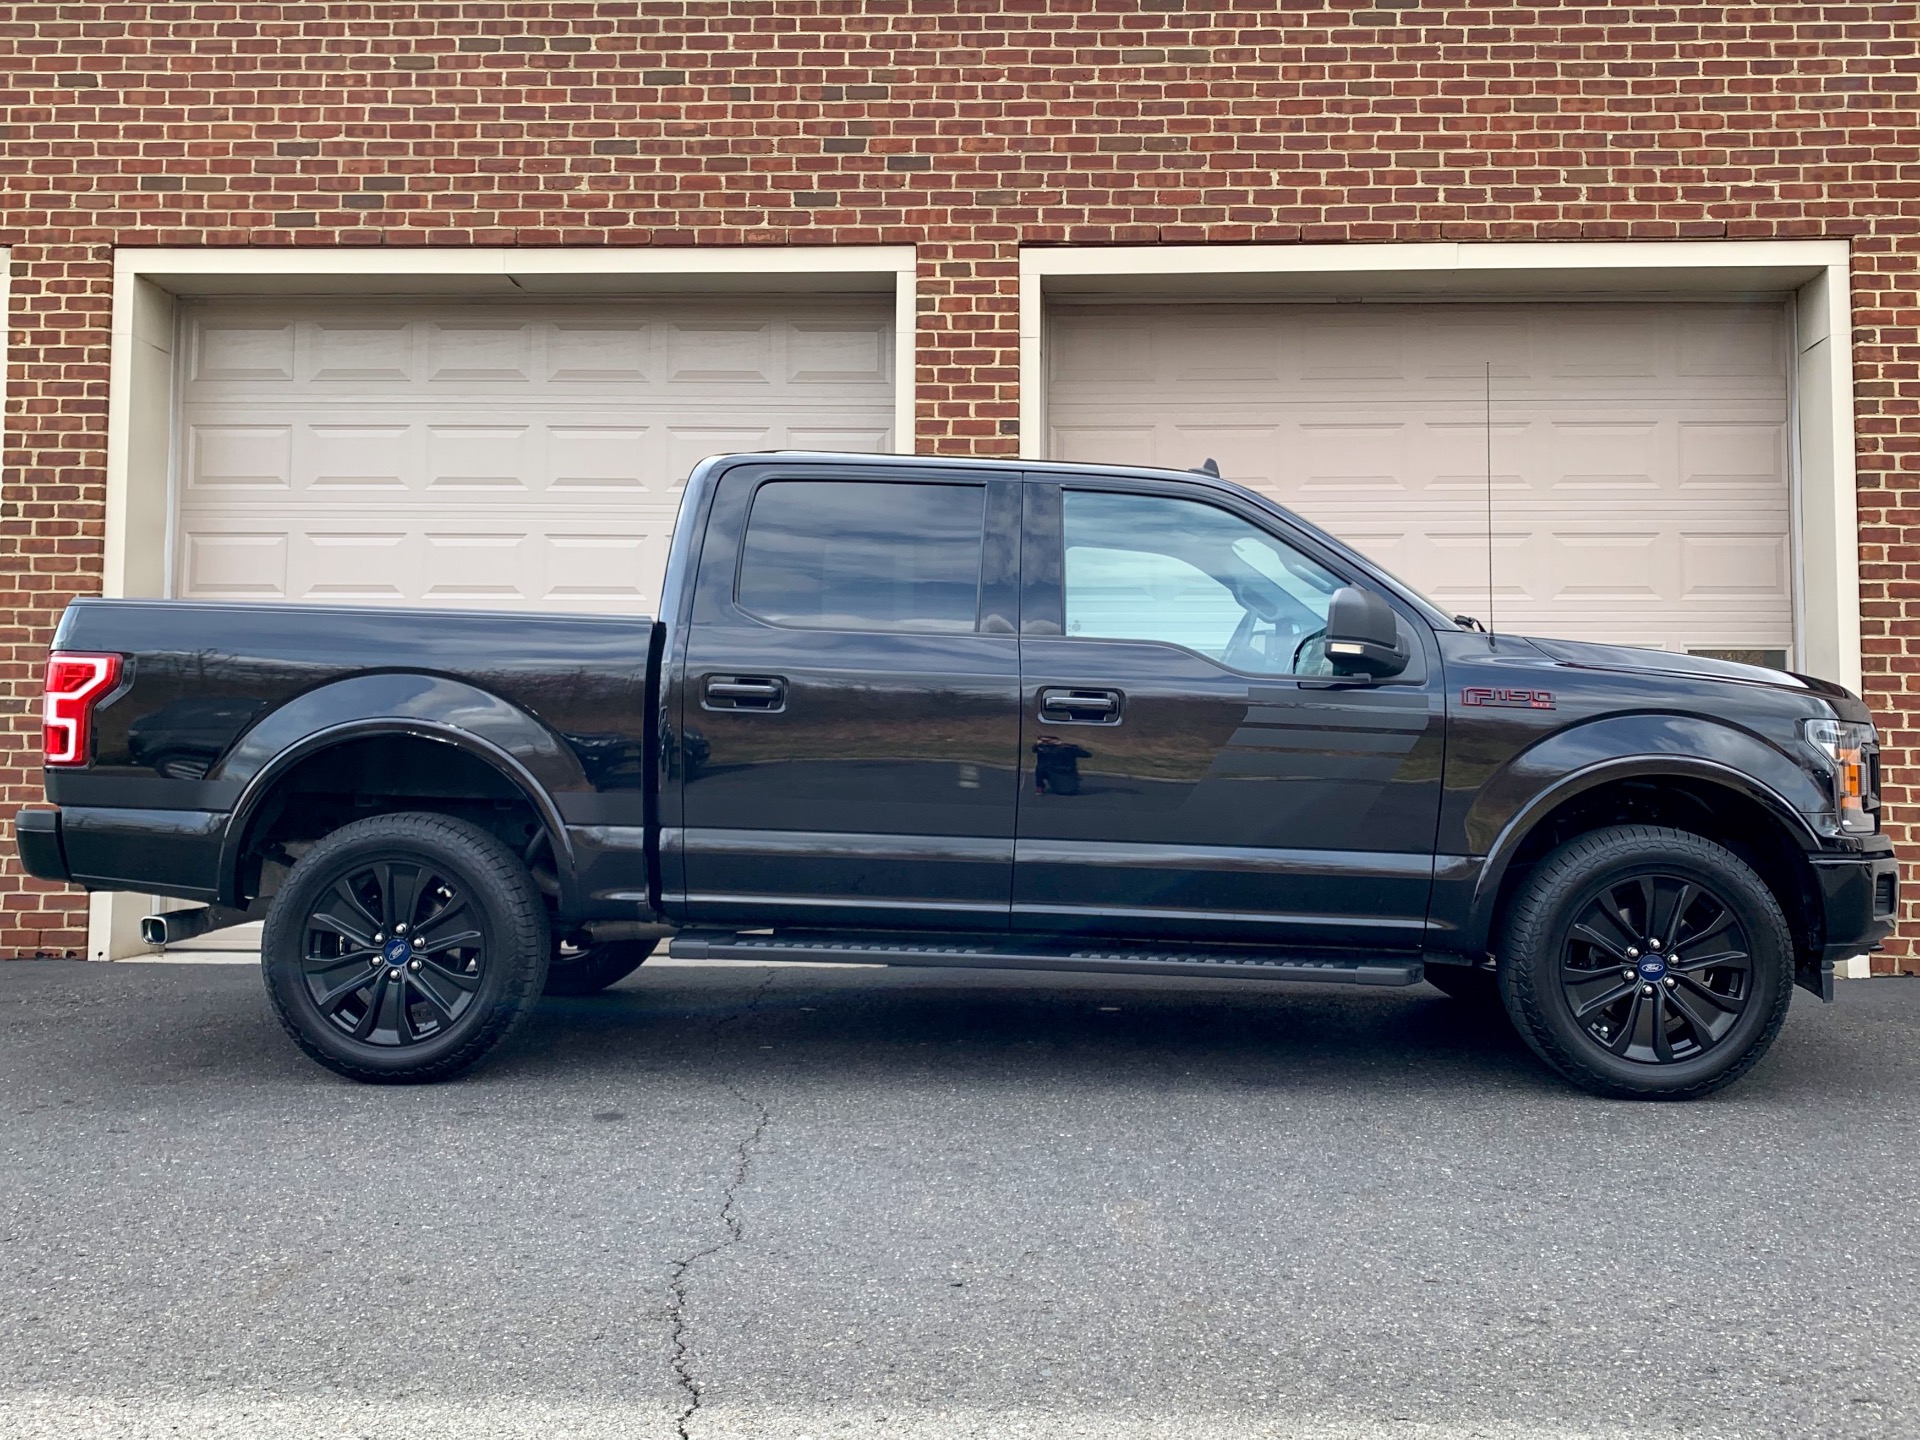 2019 Ford F 150 Xlt Special Edition Stock B29891 For Sale Near Edgewater Park Nj Nj Ford Dealer